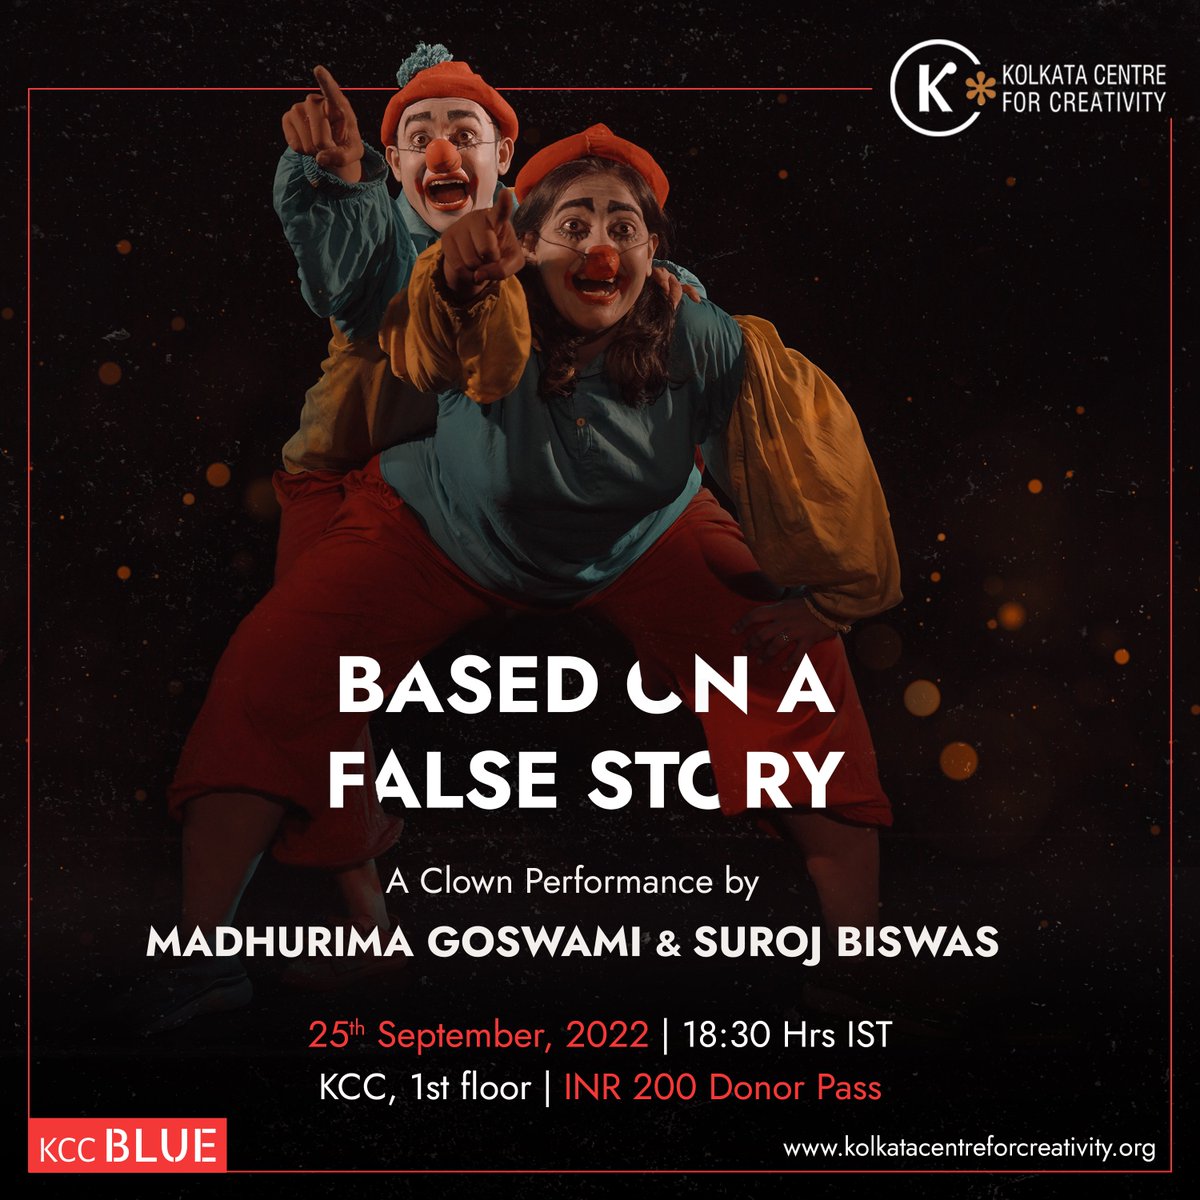 Join us for 'Based on a False Story' - A clown performance t by Madhurima Goswami and Suroj Biswas on 25th Sep, 2022 .
Donor pass: INR 200

#kcc #kccinkolkata #basedonafalsestory #performance #clownperformance #thingstodoinkolkata #kolkataperformance